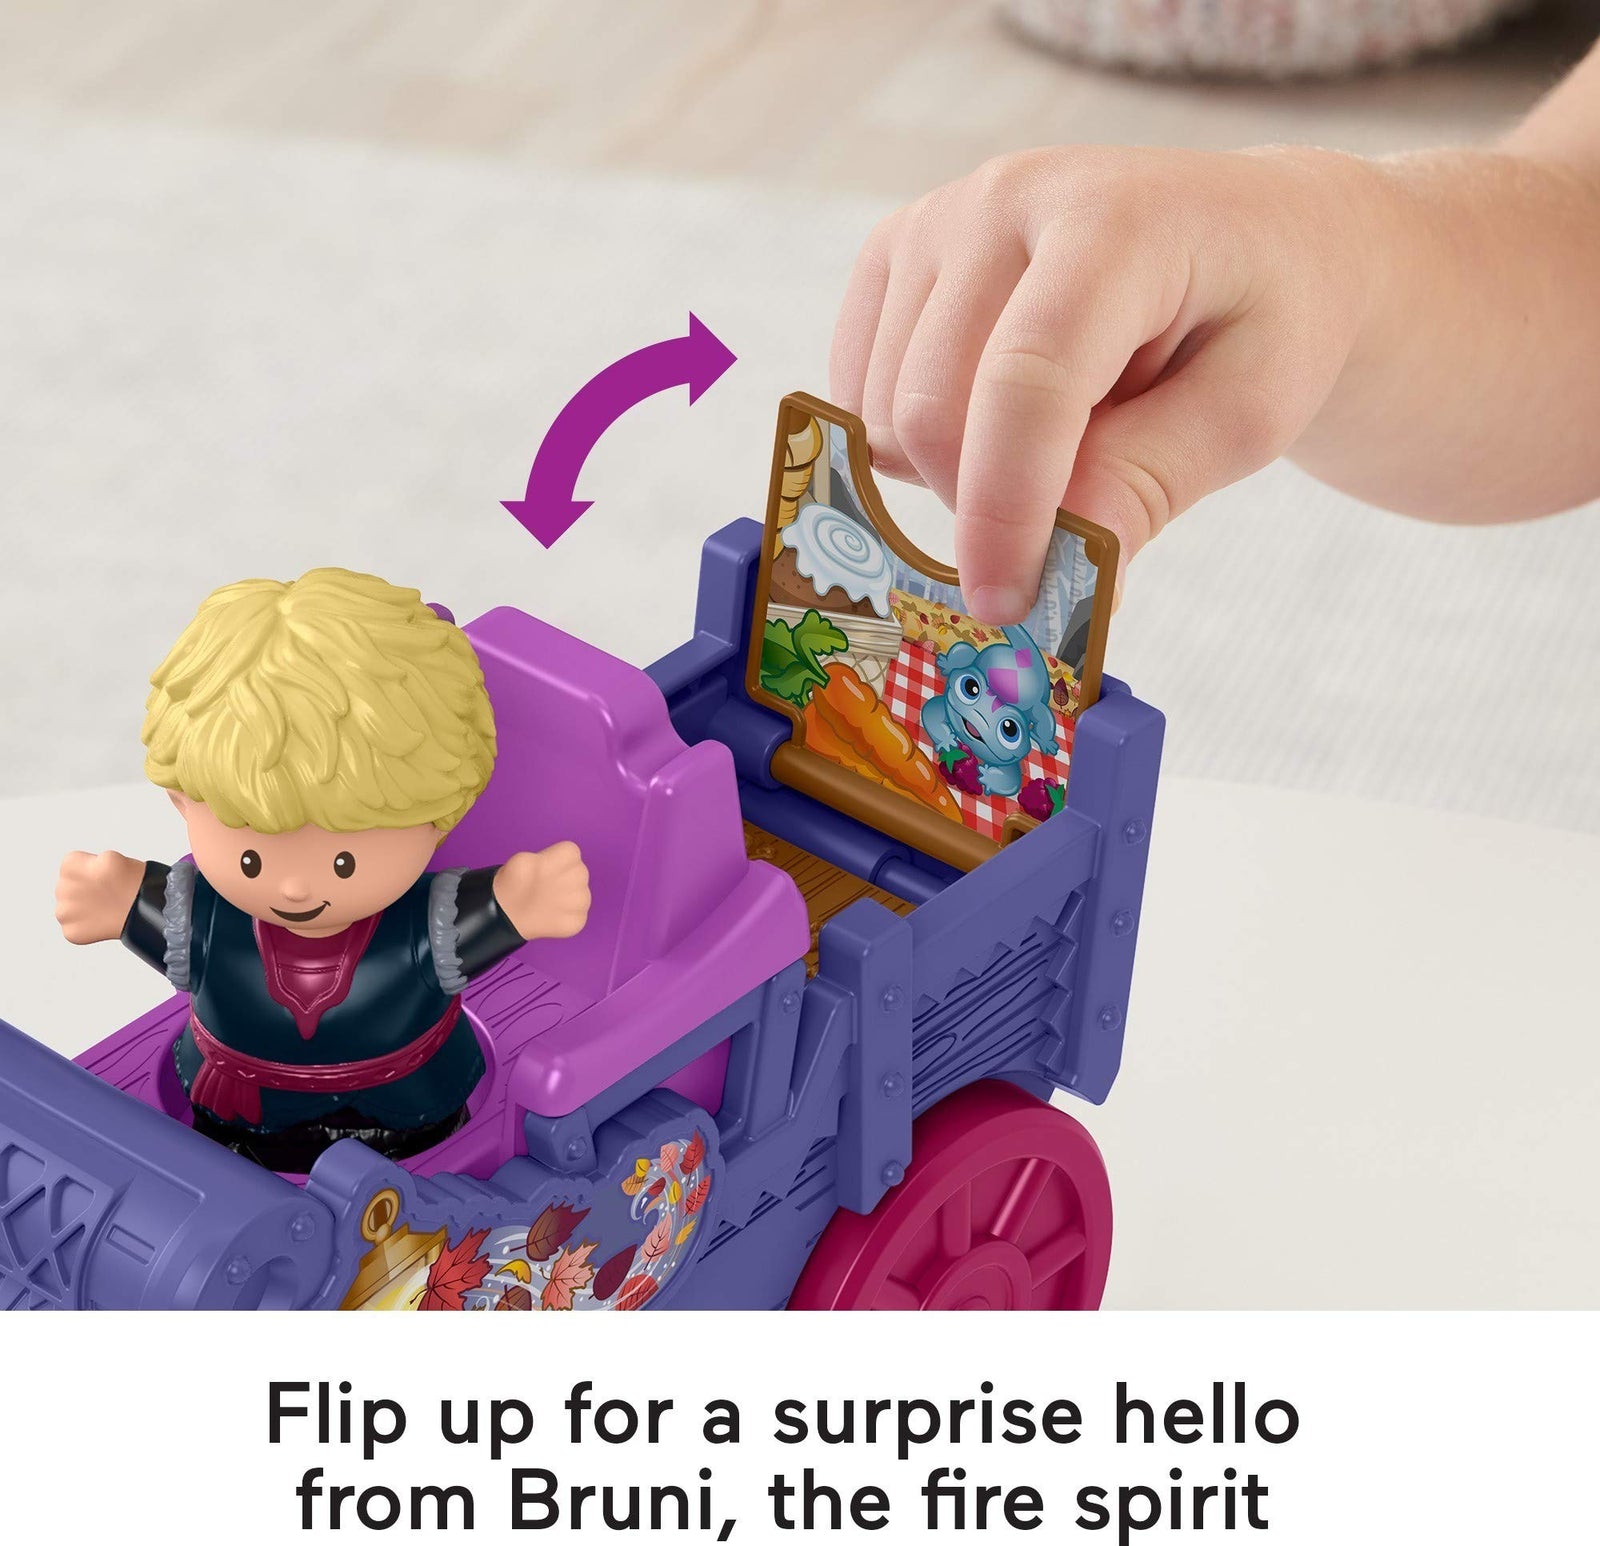 Fisher-Price Little People – Disney Frozen 2 Anna & Kristoff’s Wagon, push-along vehicle with character figures for toddlers and preschool kids